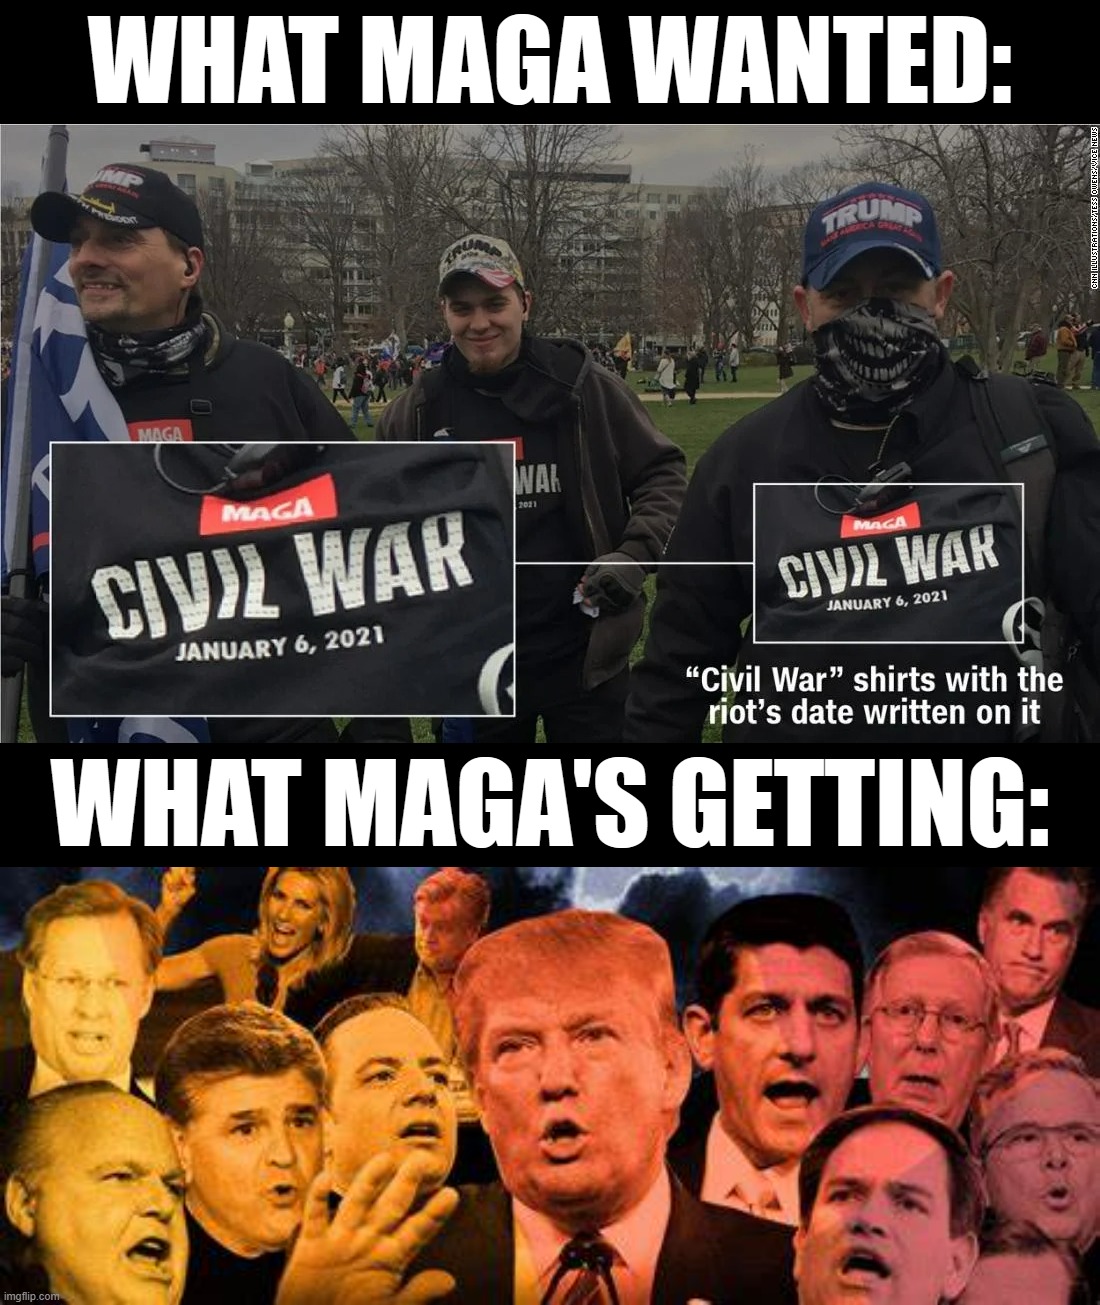 They wanted a Civil War. And they'll get a civil war, alright - within the Republican Party. | WHAT MAGA WANTED:; WHAT MAGA'S GETTING: | image tagged in maga riot symbols civil war,republican civil war | made w/ Imgflip meme maker